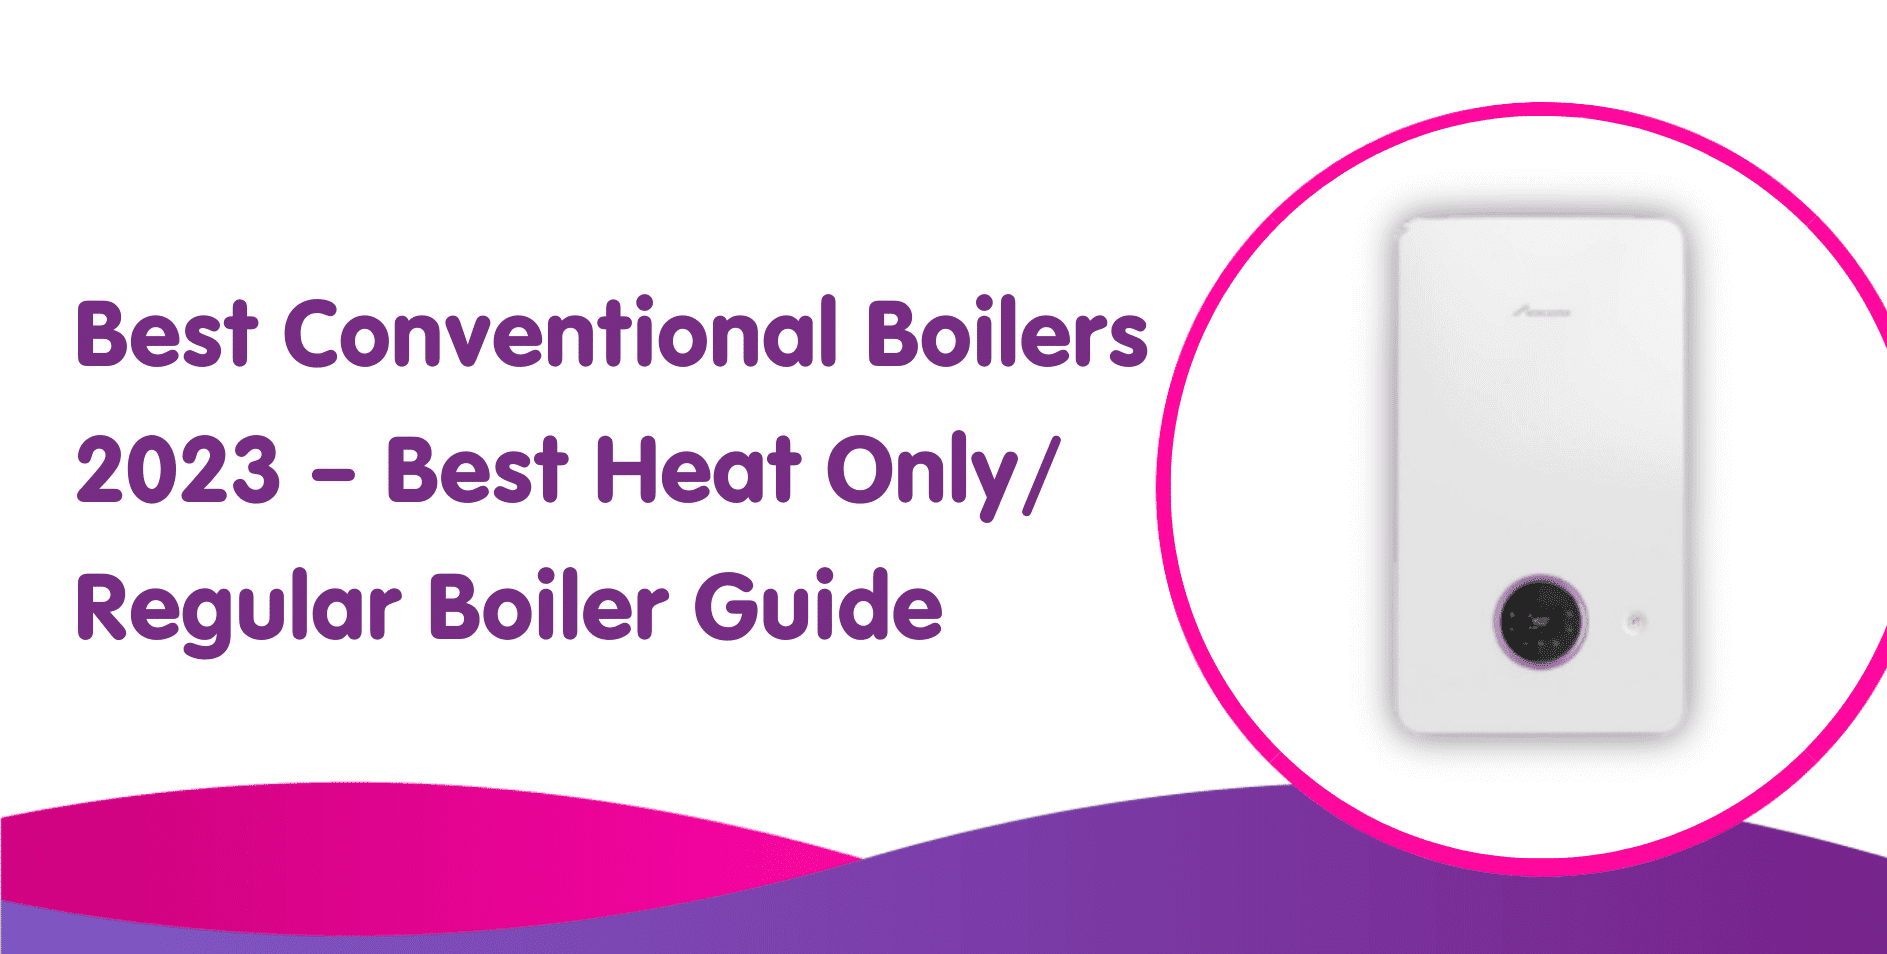 Best Conventional Boilers 2023 – Best Heat Only: Regular Boiler Guide